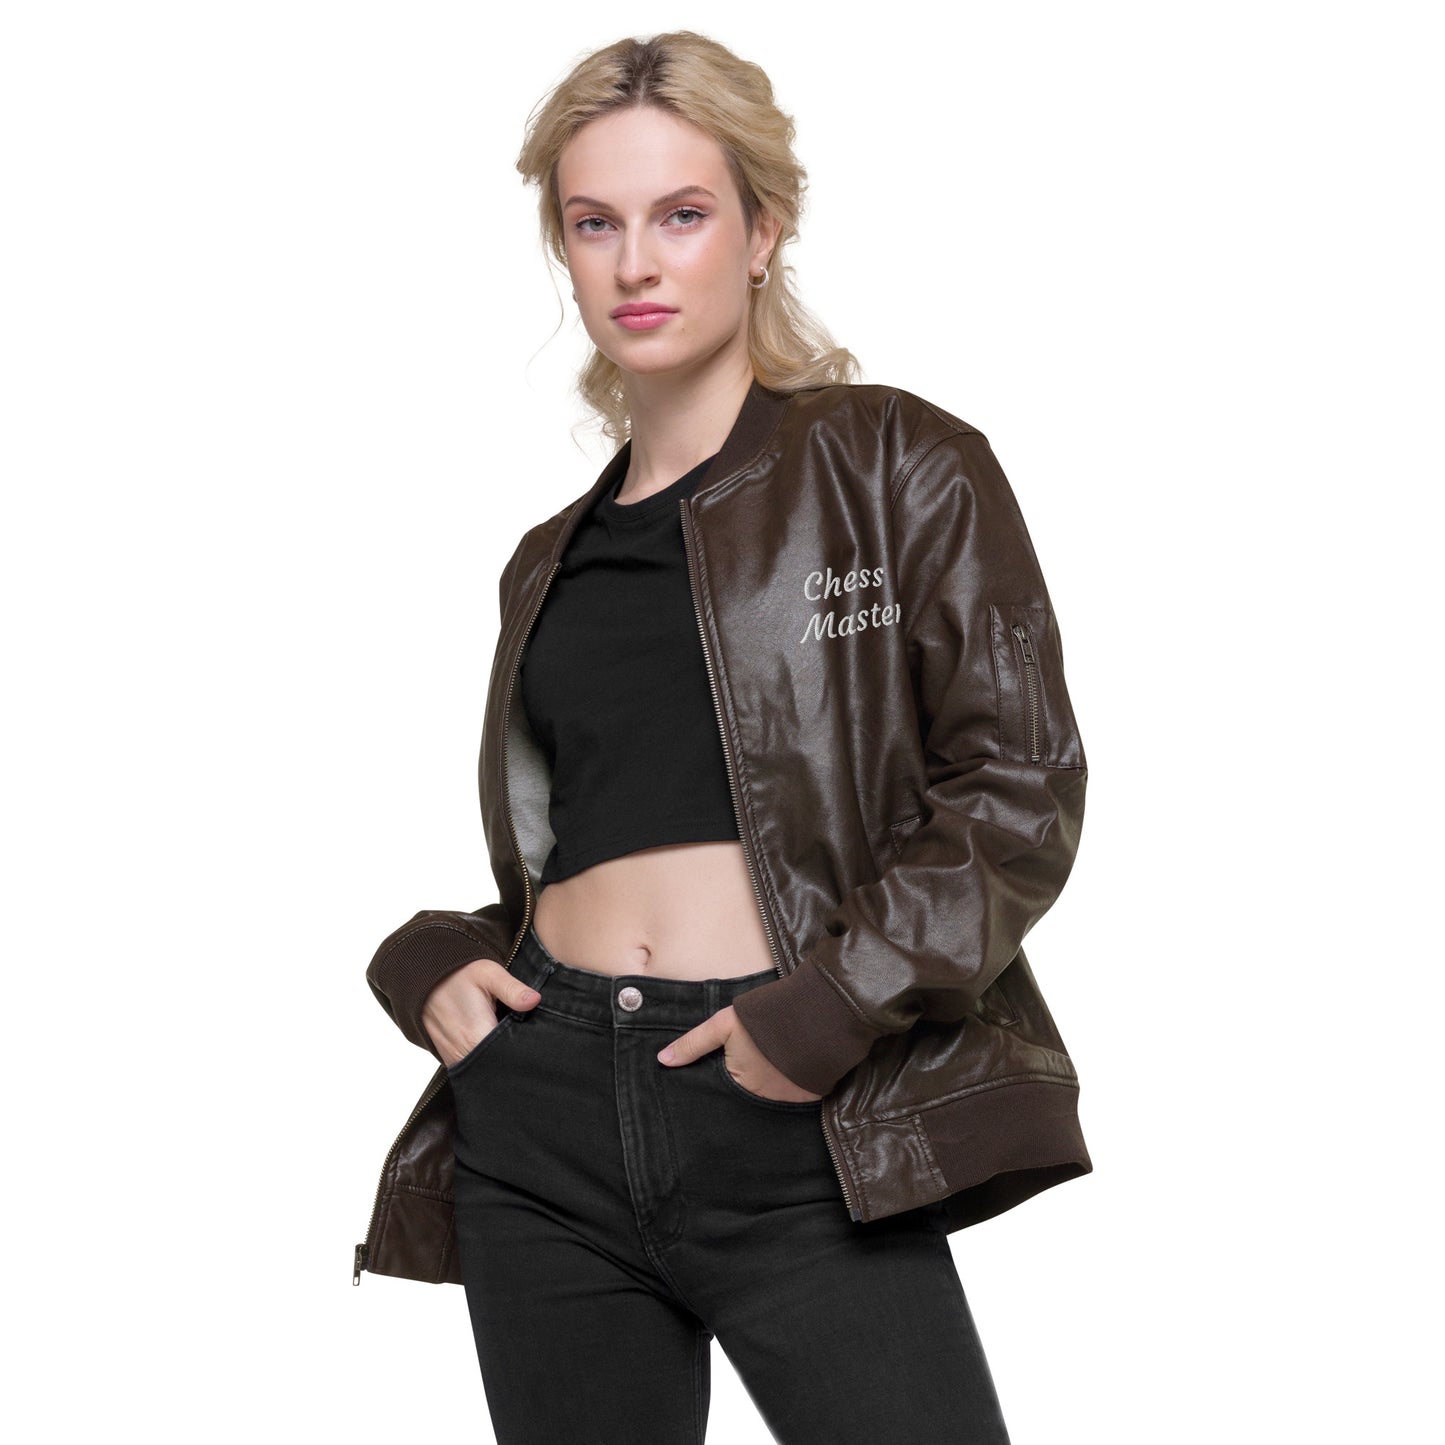 Let's Play Chess-Leather Bomber Jacket